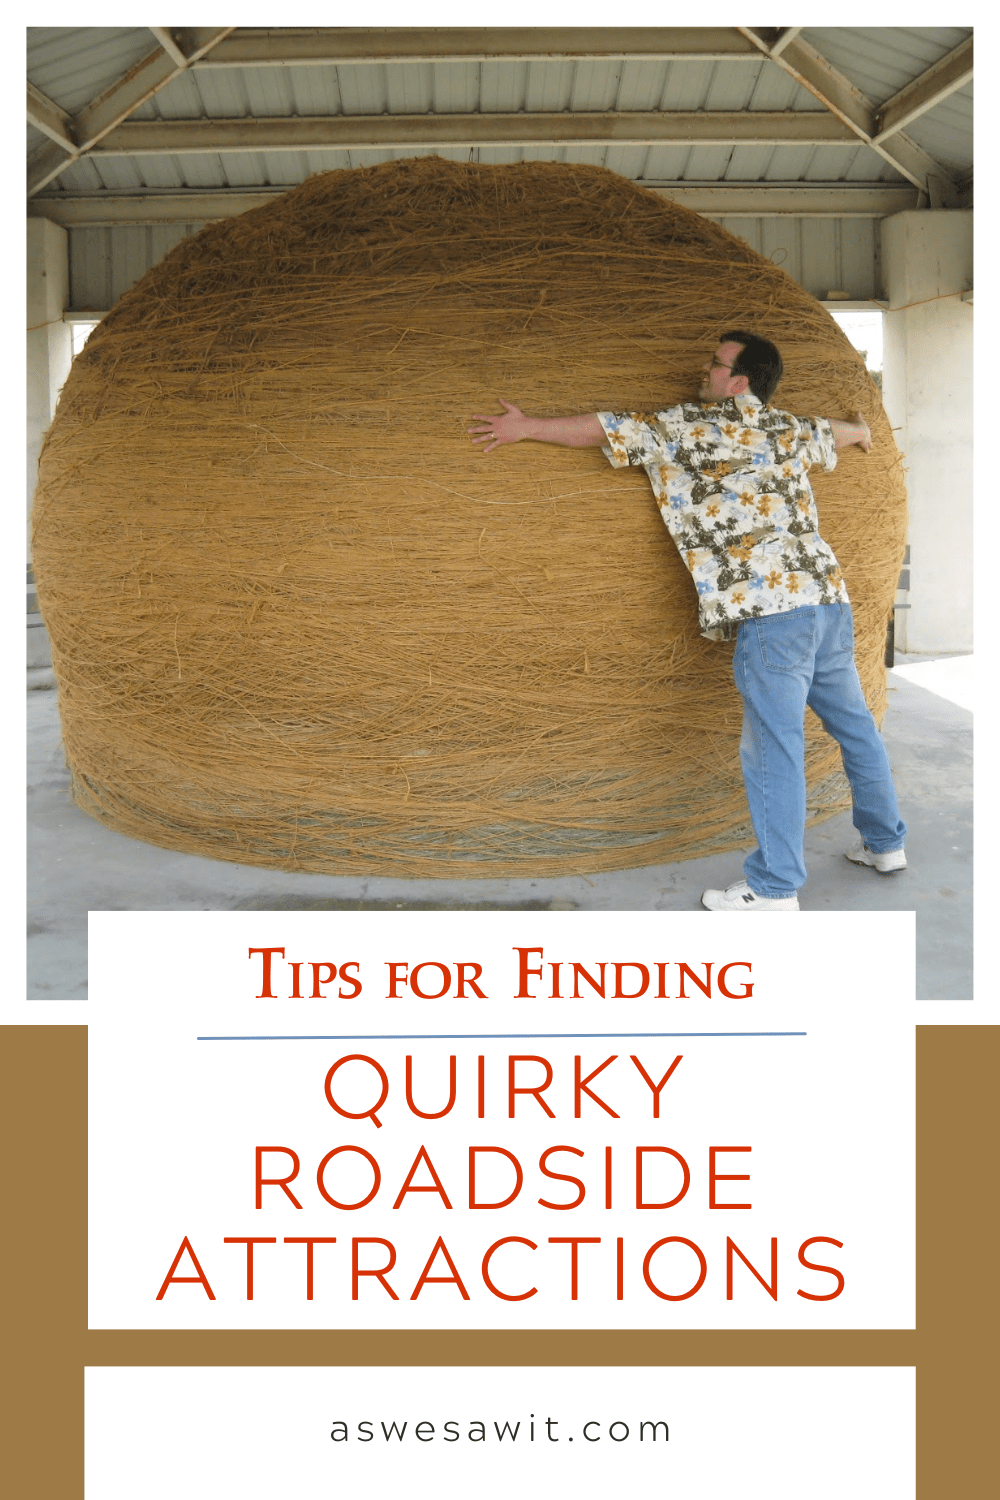 Man stretching his arms around the world's largest ball of twine. The text overlay says "tips for finding quirky roadside attractions"